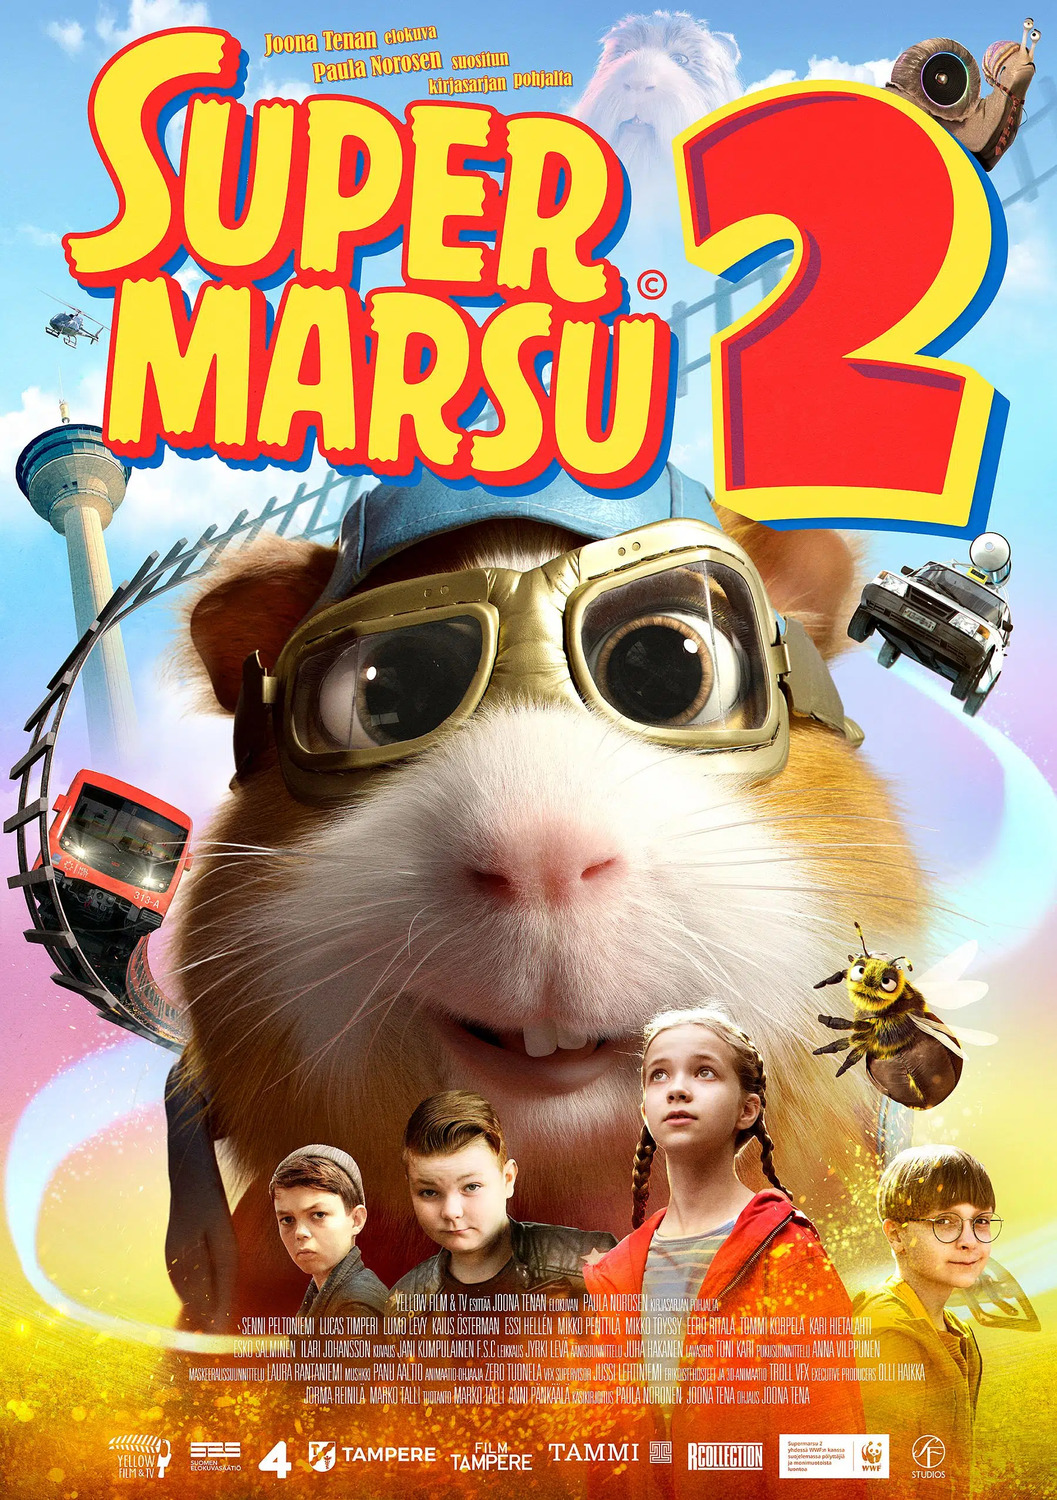 Extra Large Movie Poster Image for Supermarsu 2 